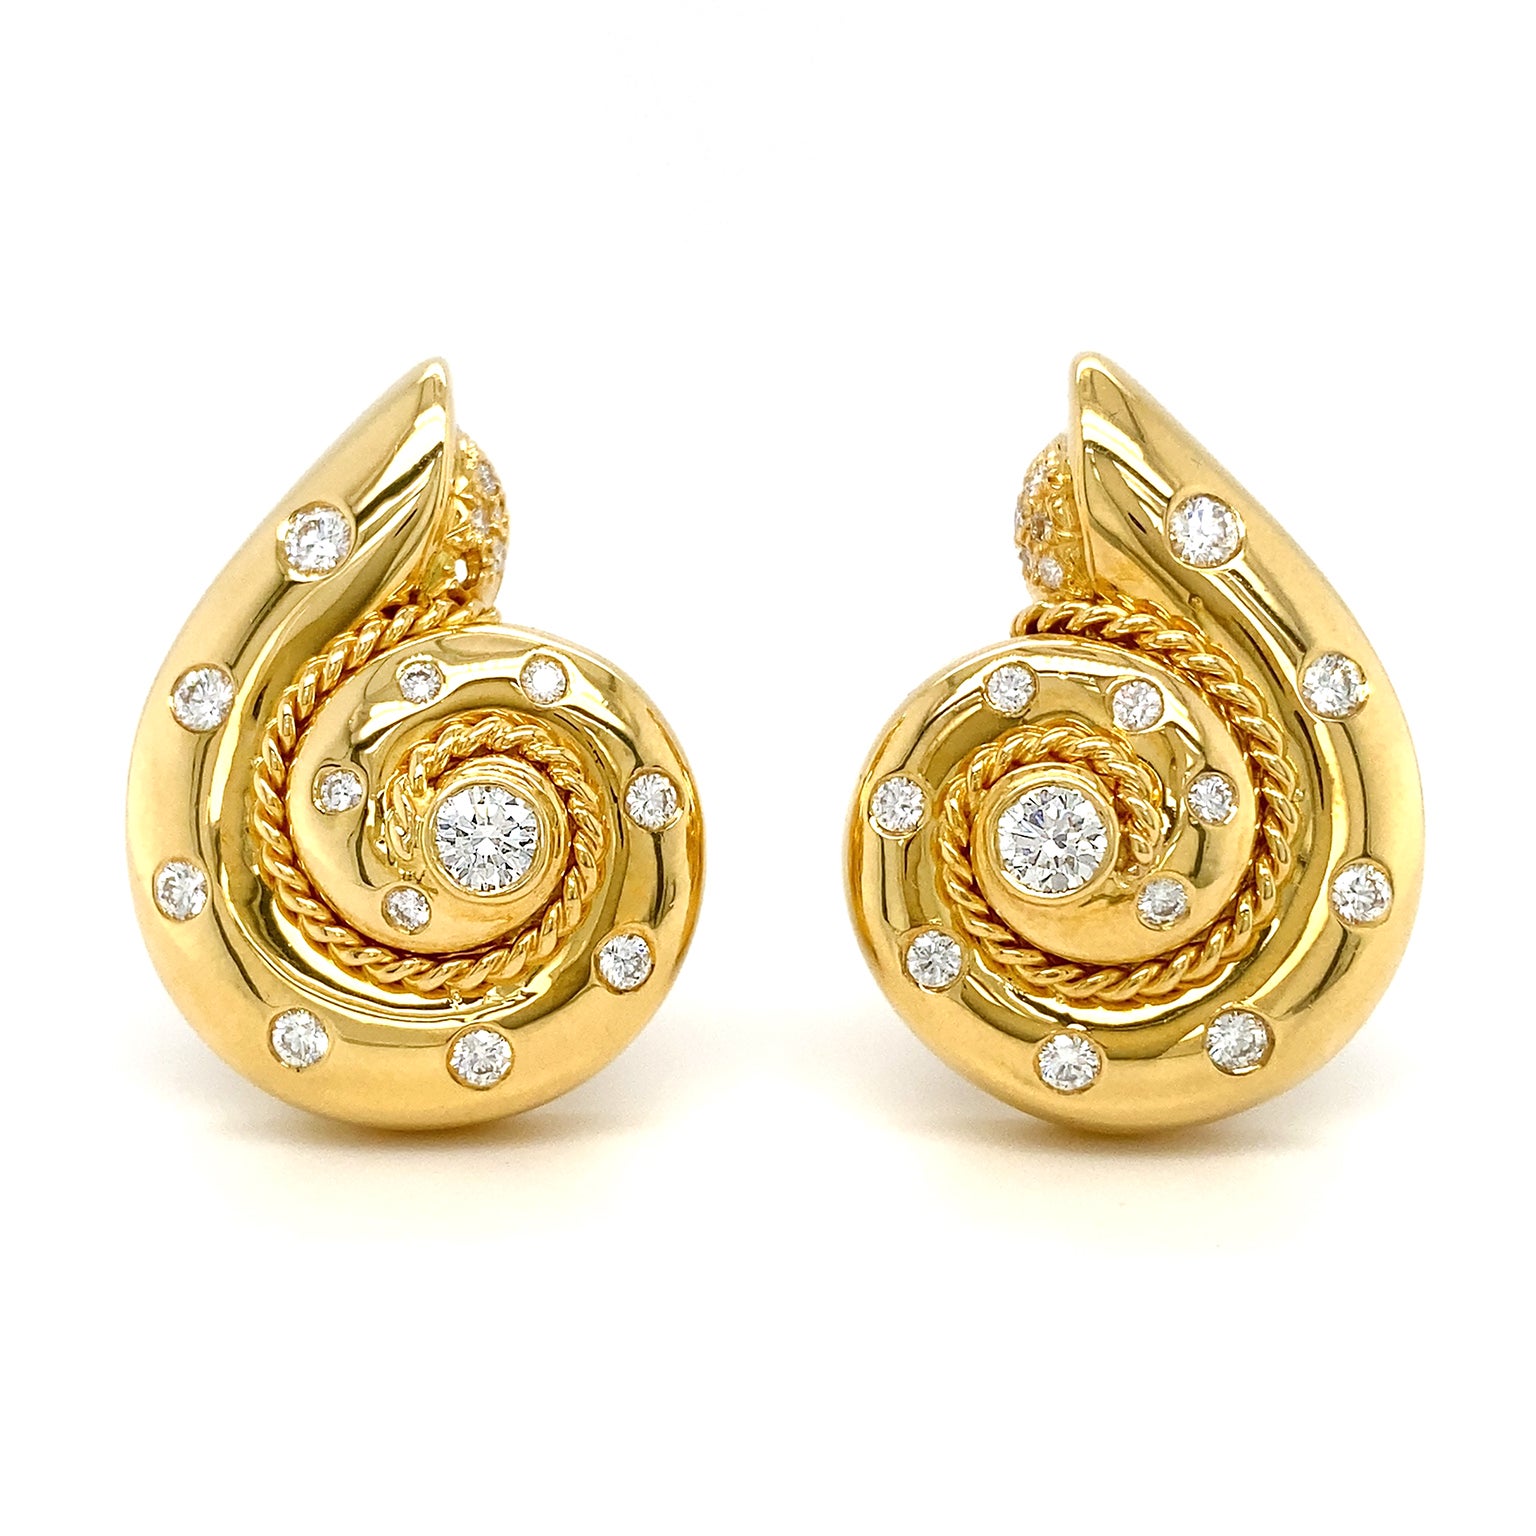 A glimmering aquatic look is achieved by these polished 18k yellow gold snail earrings. Round brilliant cut diamonds are bezel set throughout for added luster. In the center is a larger diamond. The braided spiral within, traces the curve for added